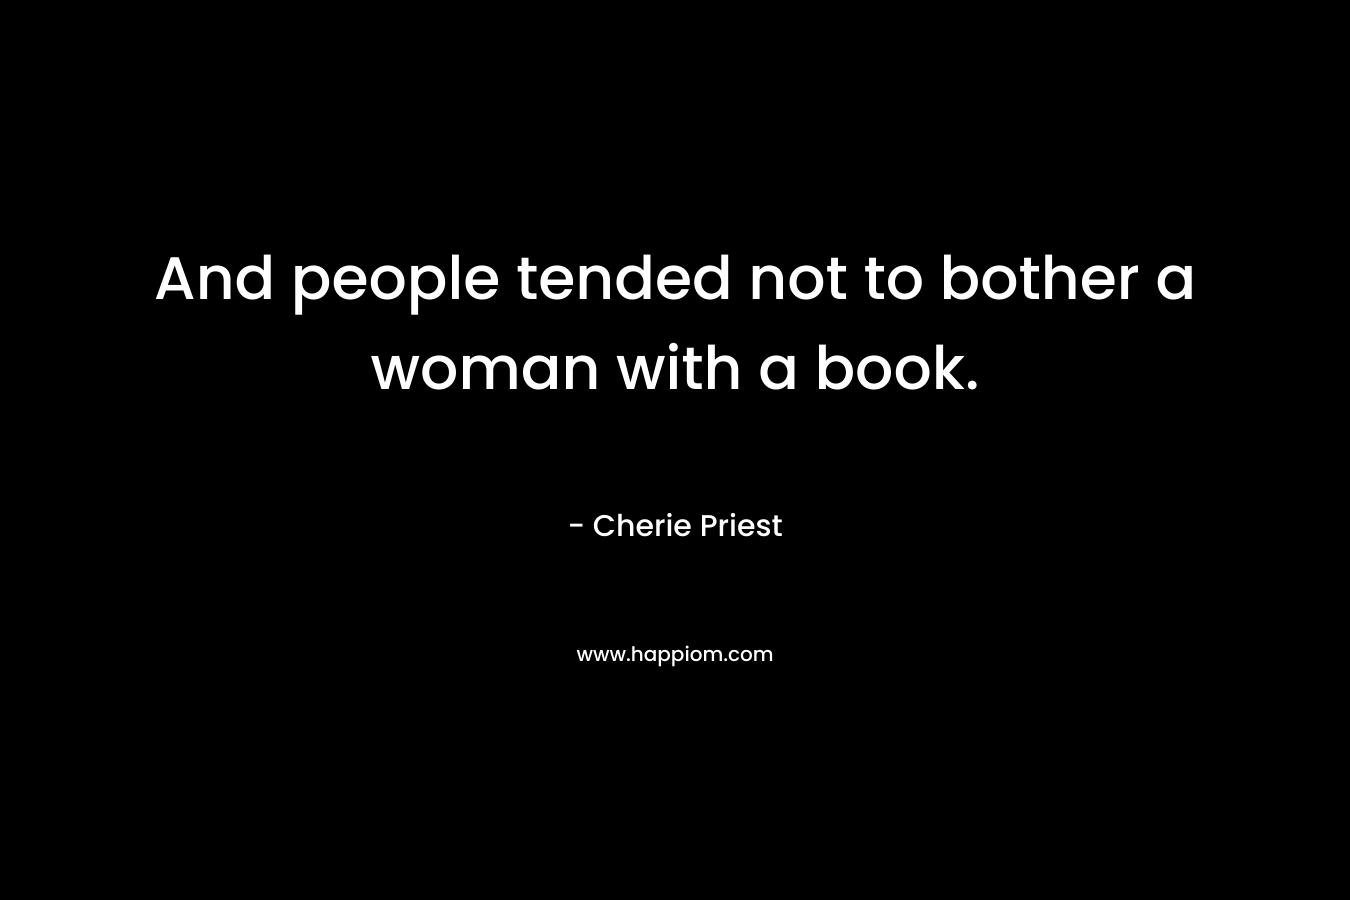 And people tended not to bother a woman with a book.